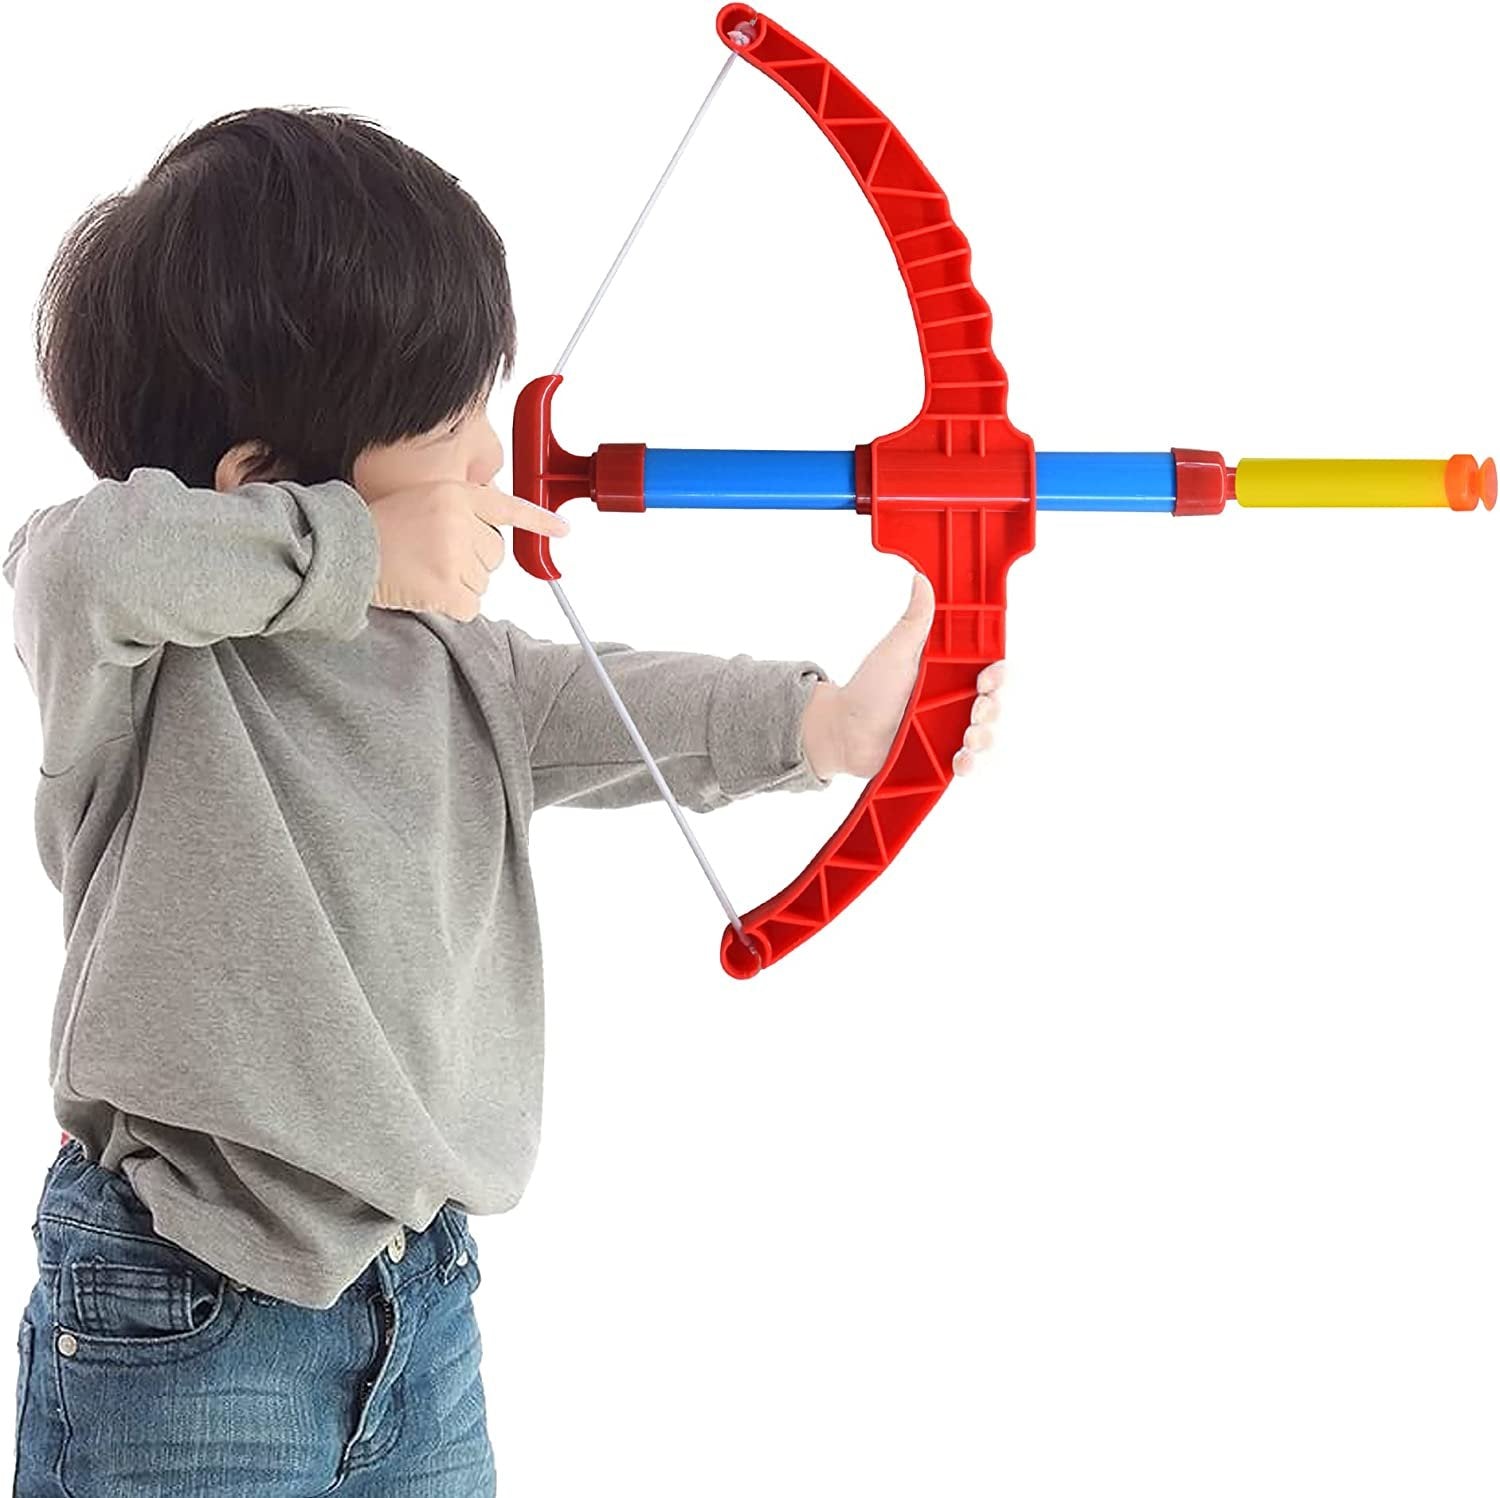 Red Super Bow & Arrow Shooter Set, Includes Air-Powered Bow, Barrel, Six Soft Foam Darts, Comes in Blister Card Packaging, Sports Toy for Kids